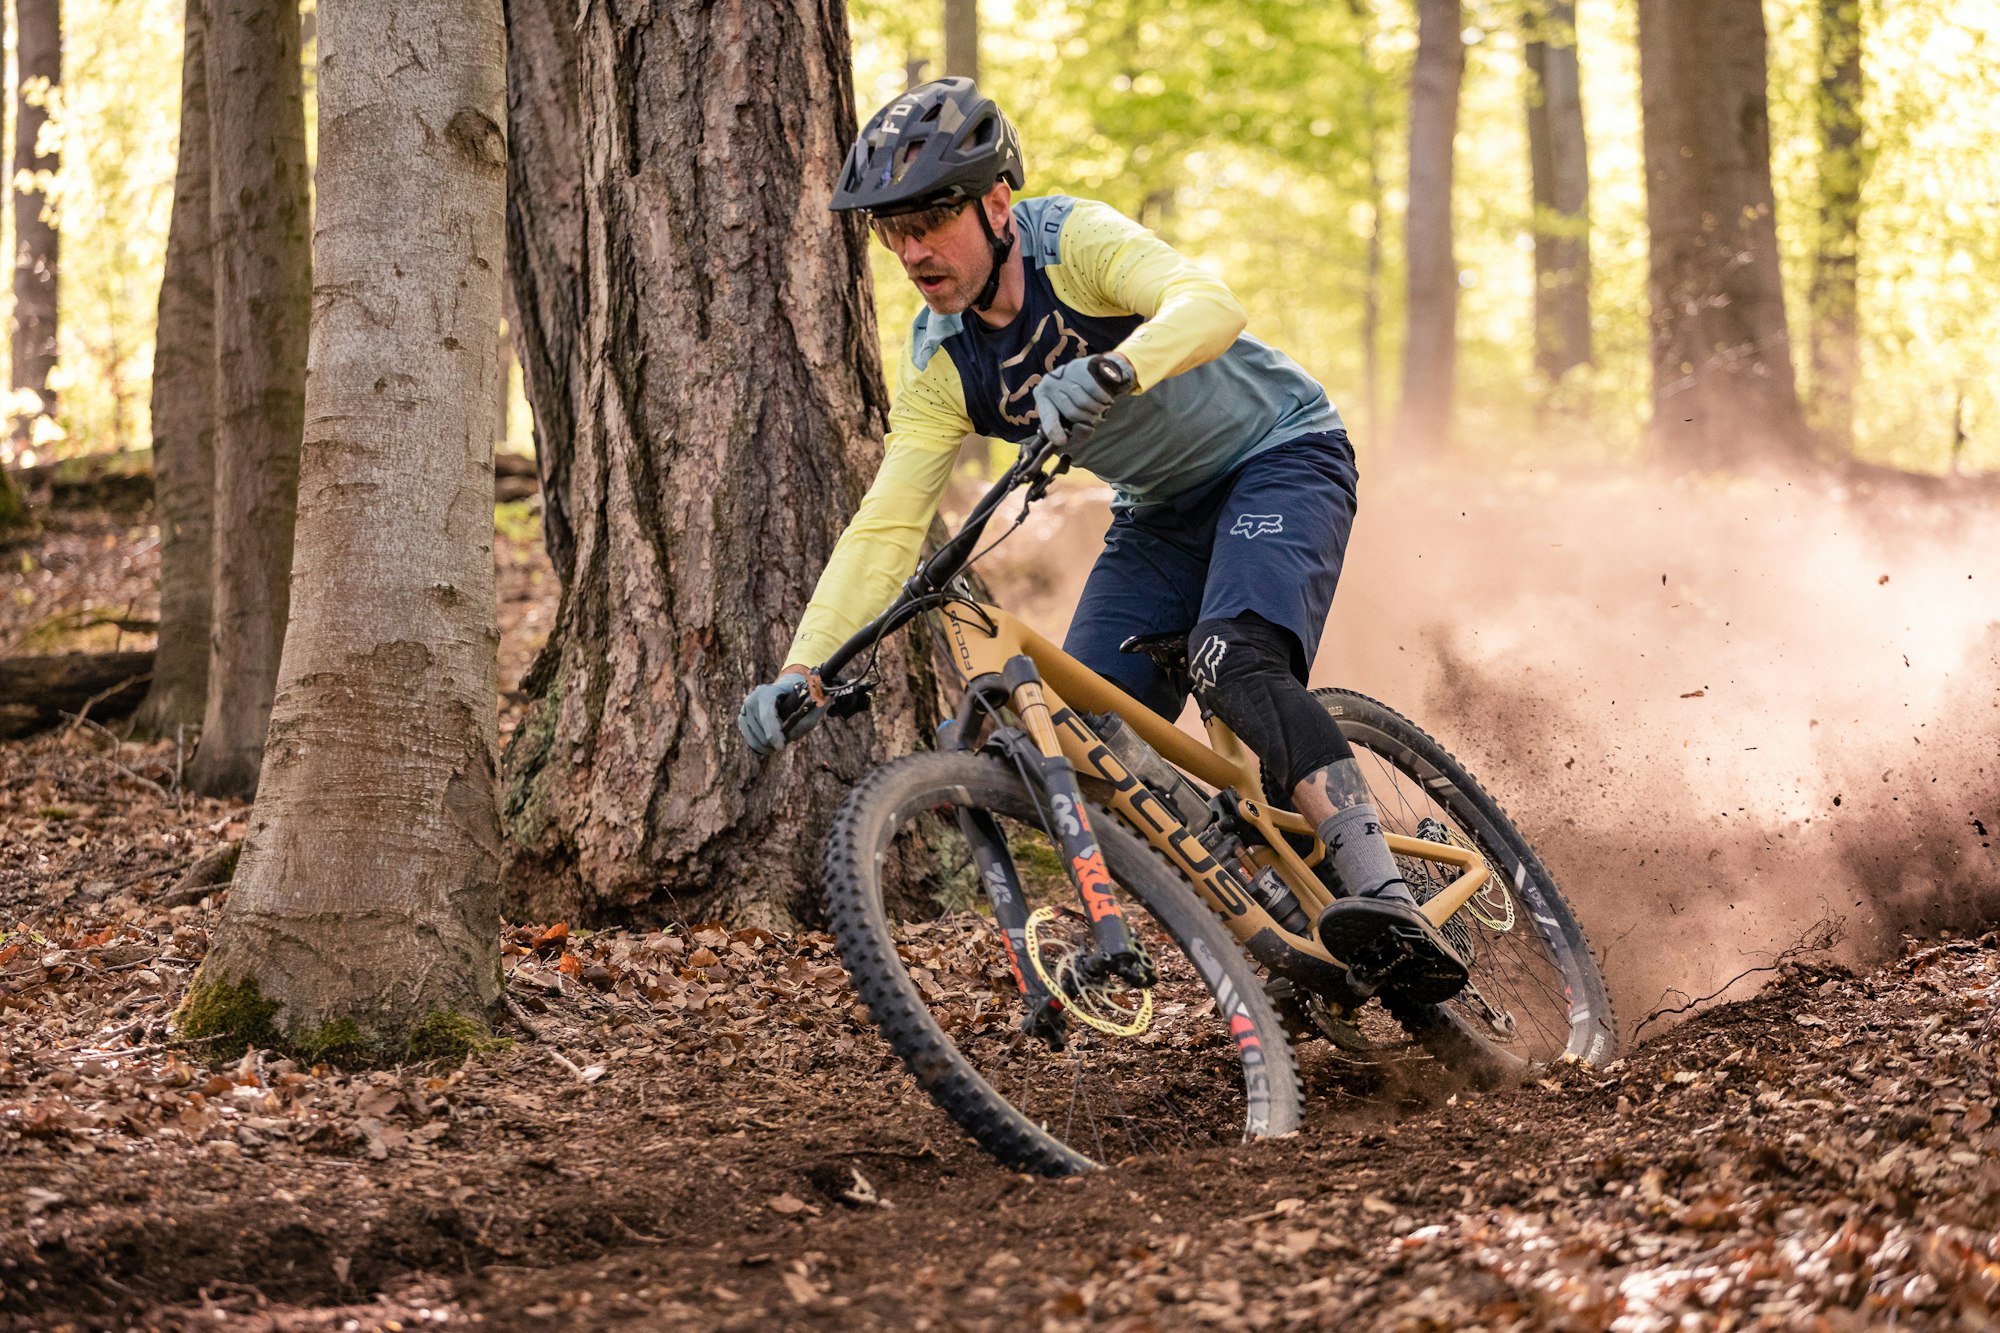 Stuttgart area, Baden-Württemberg, Germany: A male mountain biker on a Focus mountain bike ripping a dusty turn in the forest on a sunny spring day.